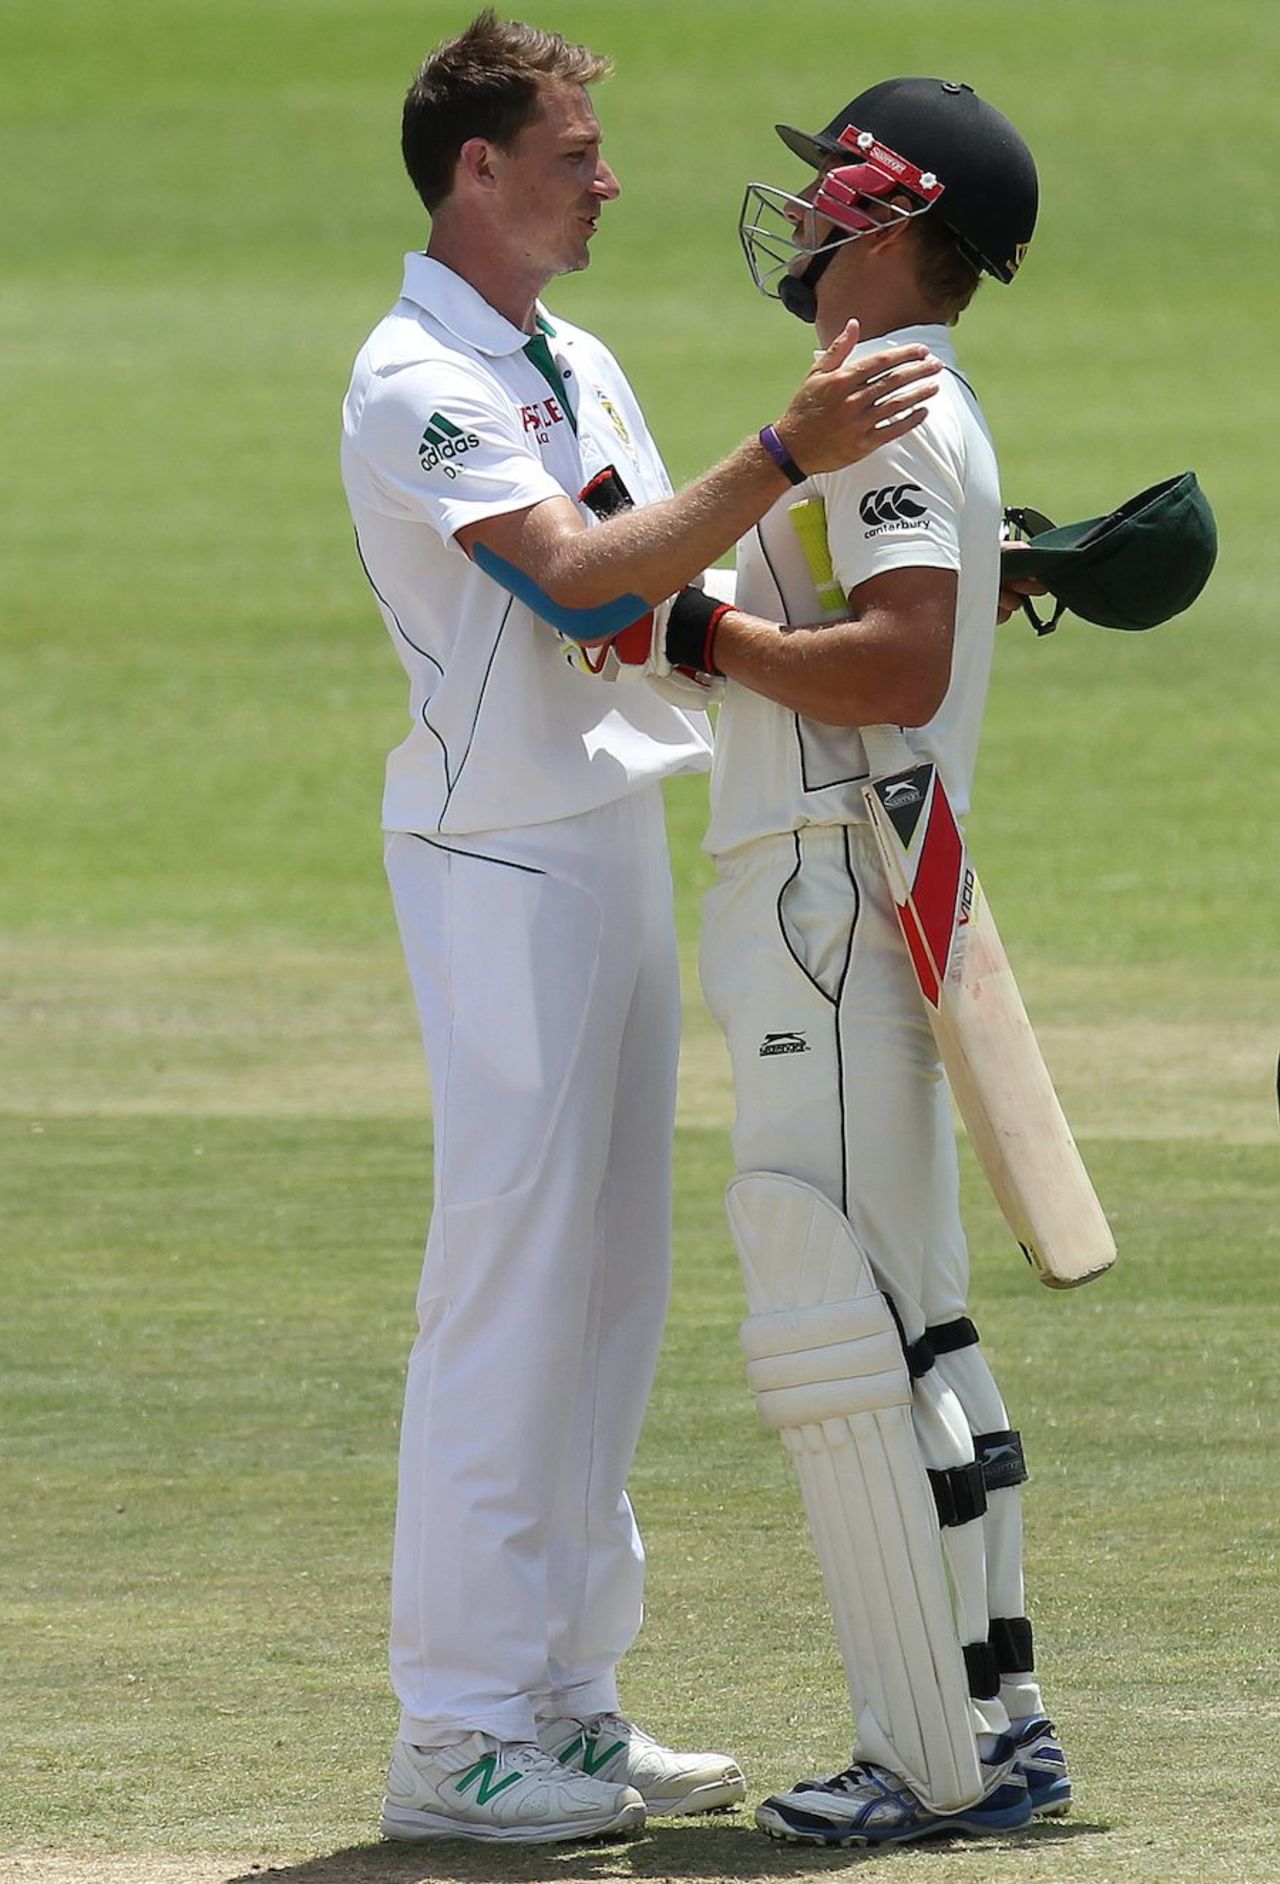 Dale Steyn speaks to Neil Wagner at the end of the game, South Africa v New Zealand, 2nd Test, Port Elizabeth, 4th day, January 14, 2013